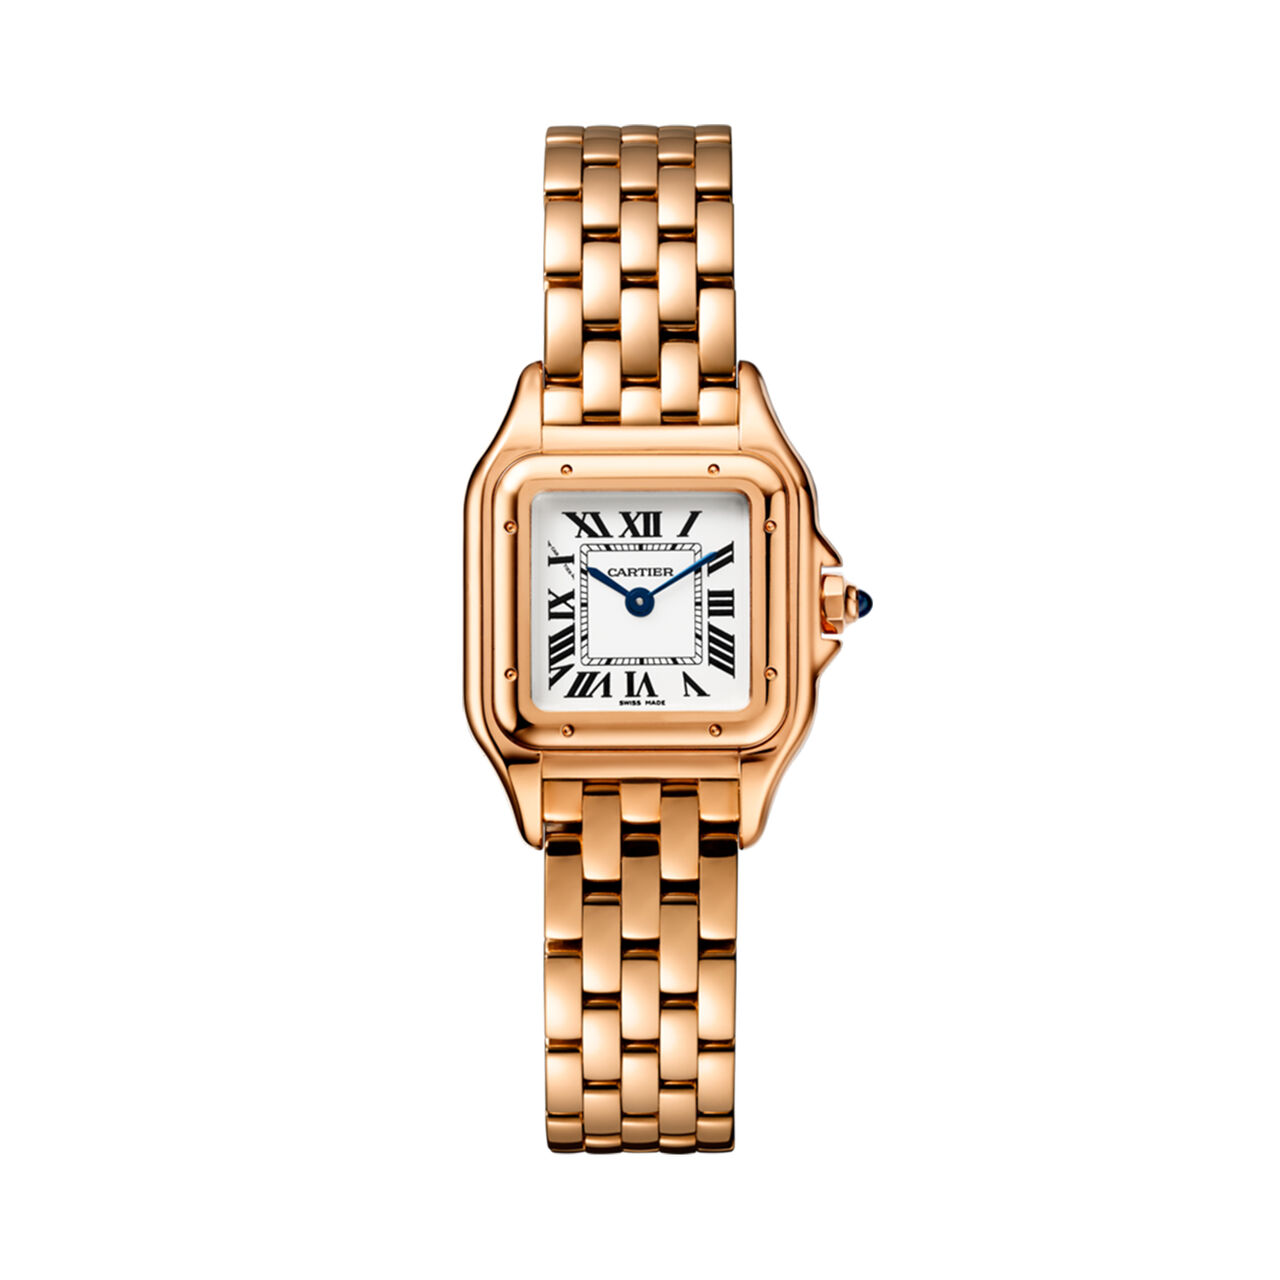 maison birks panthere de cartier watch small model rose gold wgpn0006 image number 0